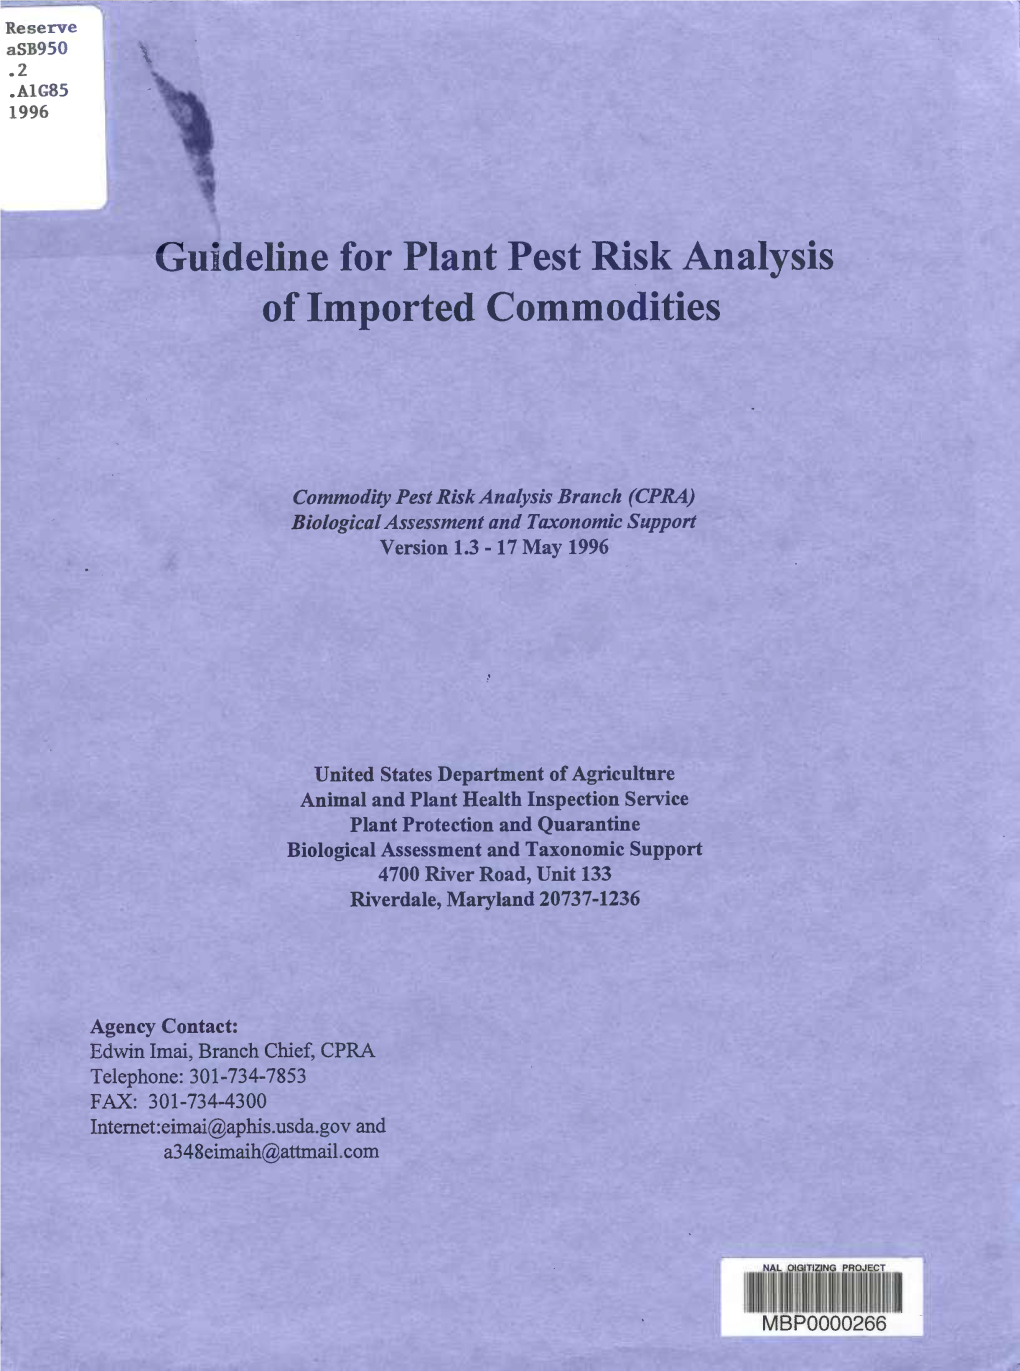 Guideline for Plant Pest Risk Analysis of Imported Commodities